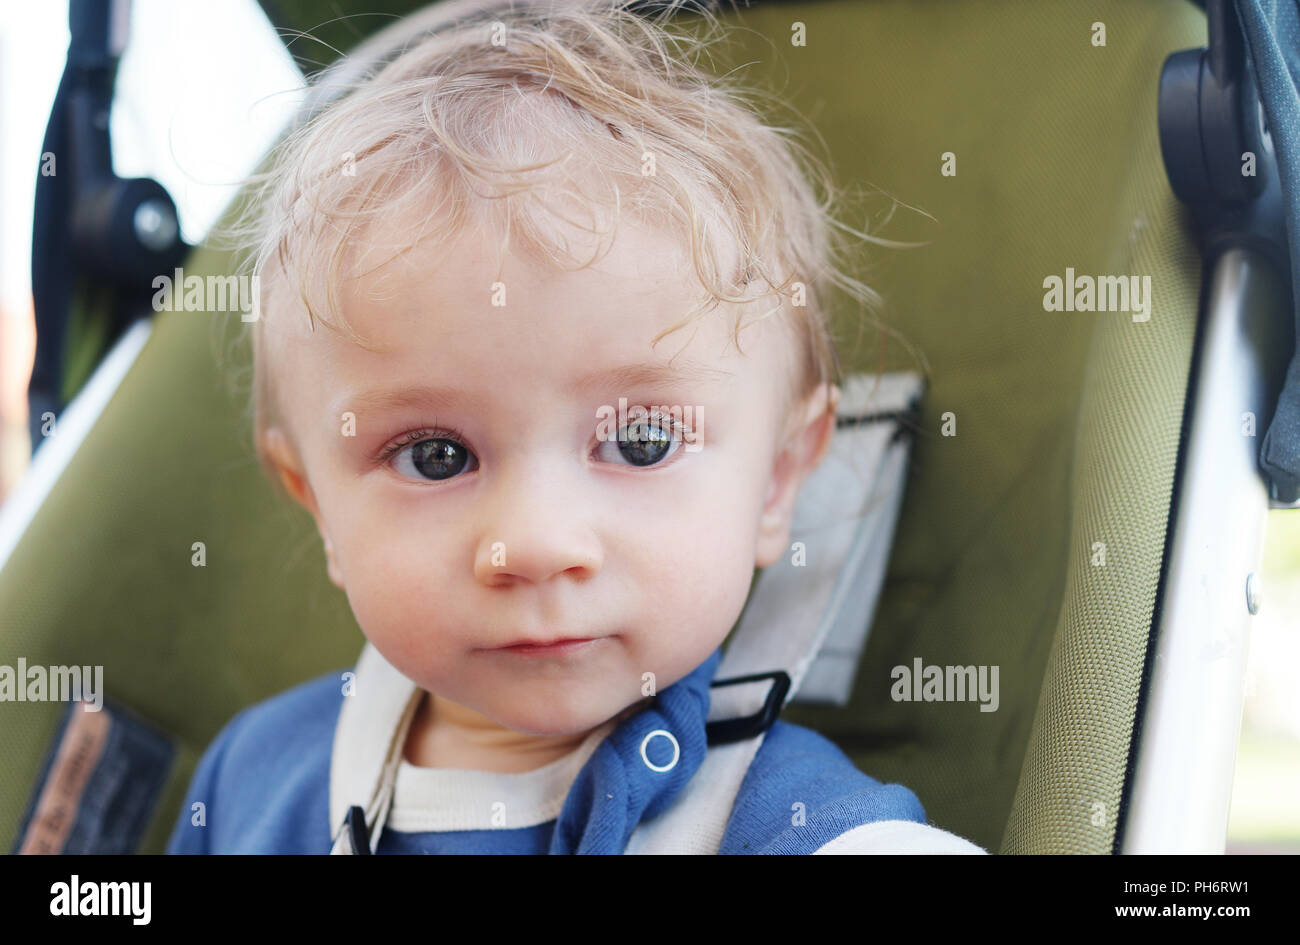 Close up Cute White Baby Boy on a Stroller Stock Photo